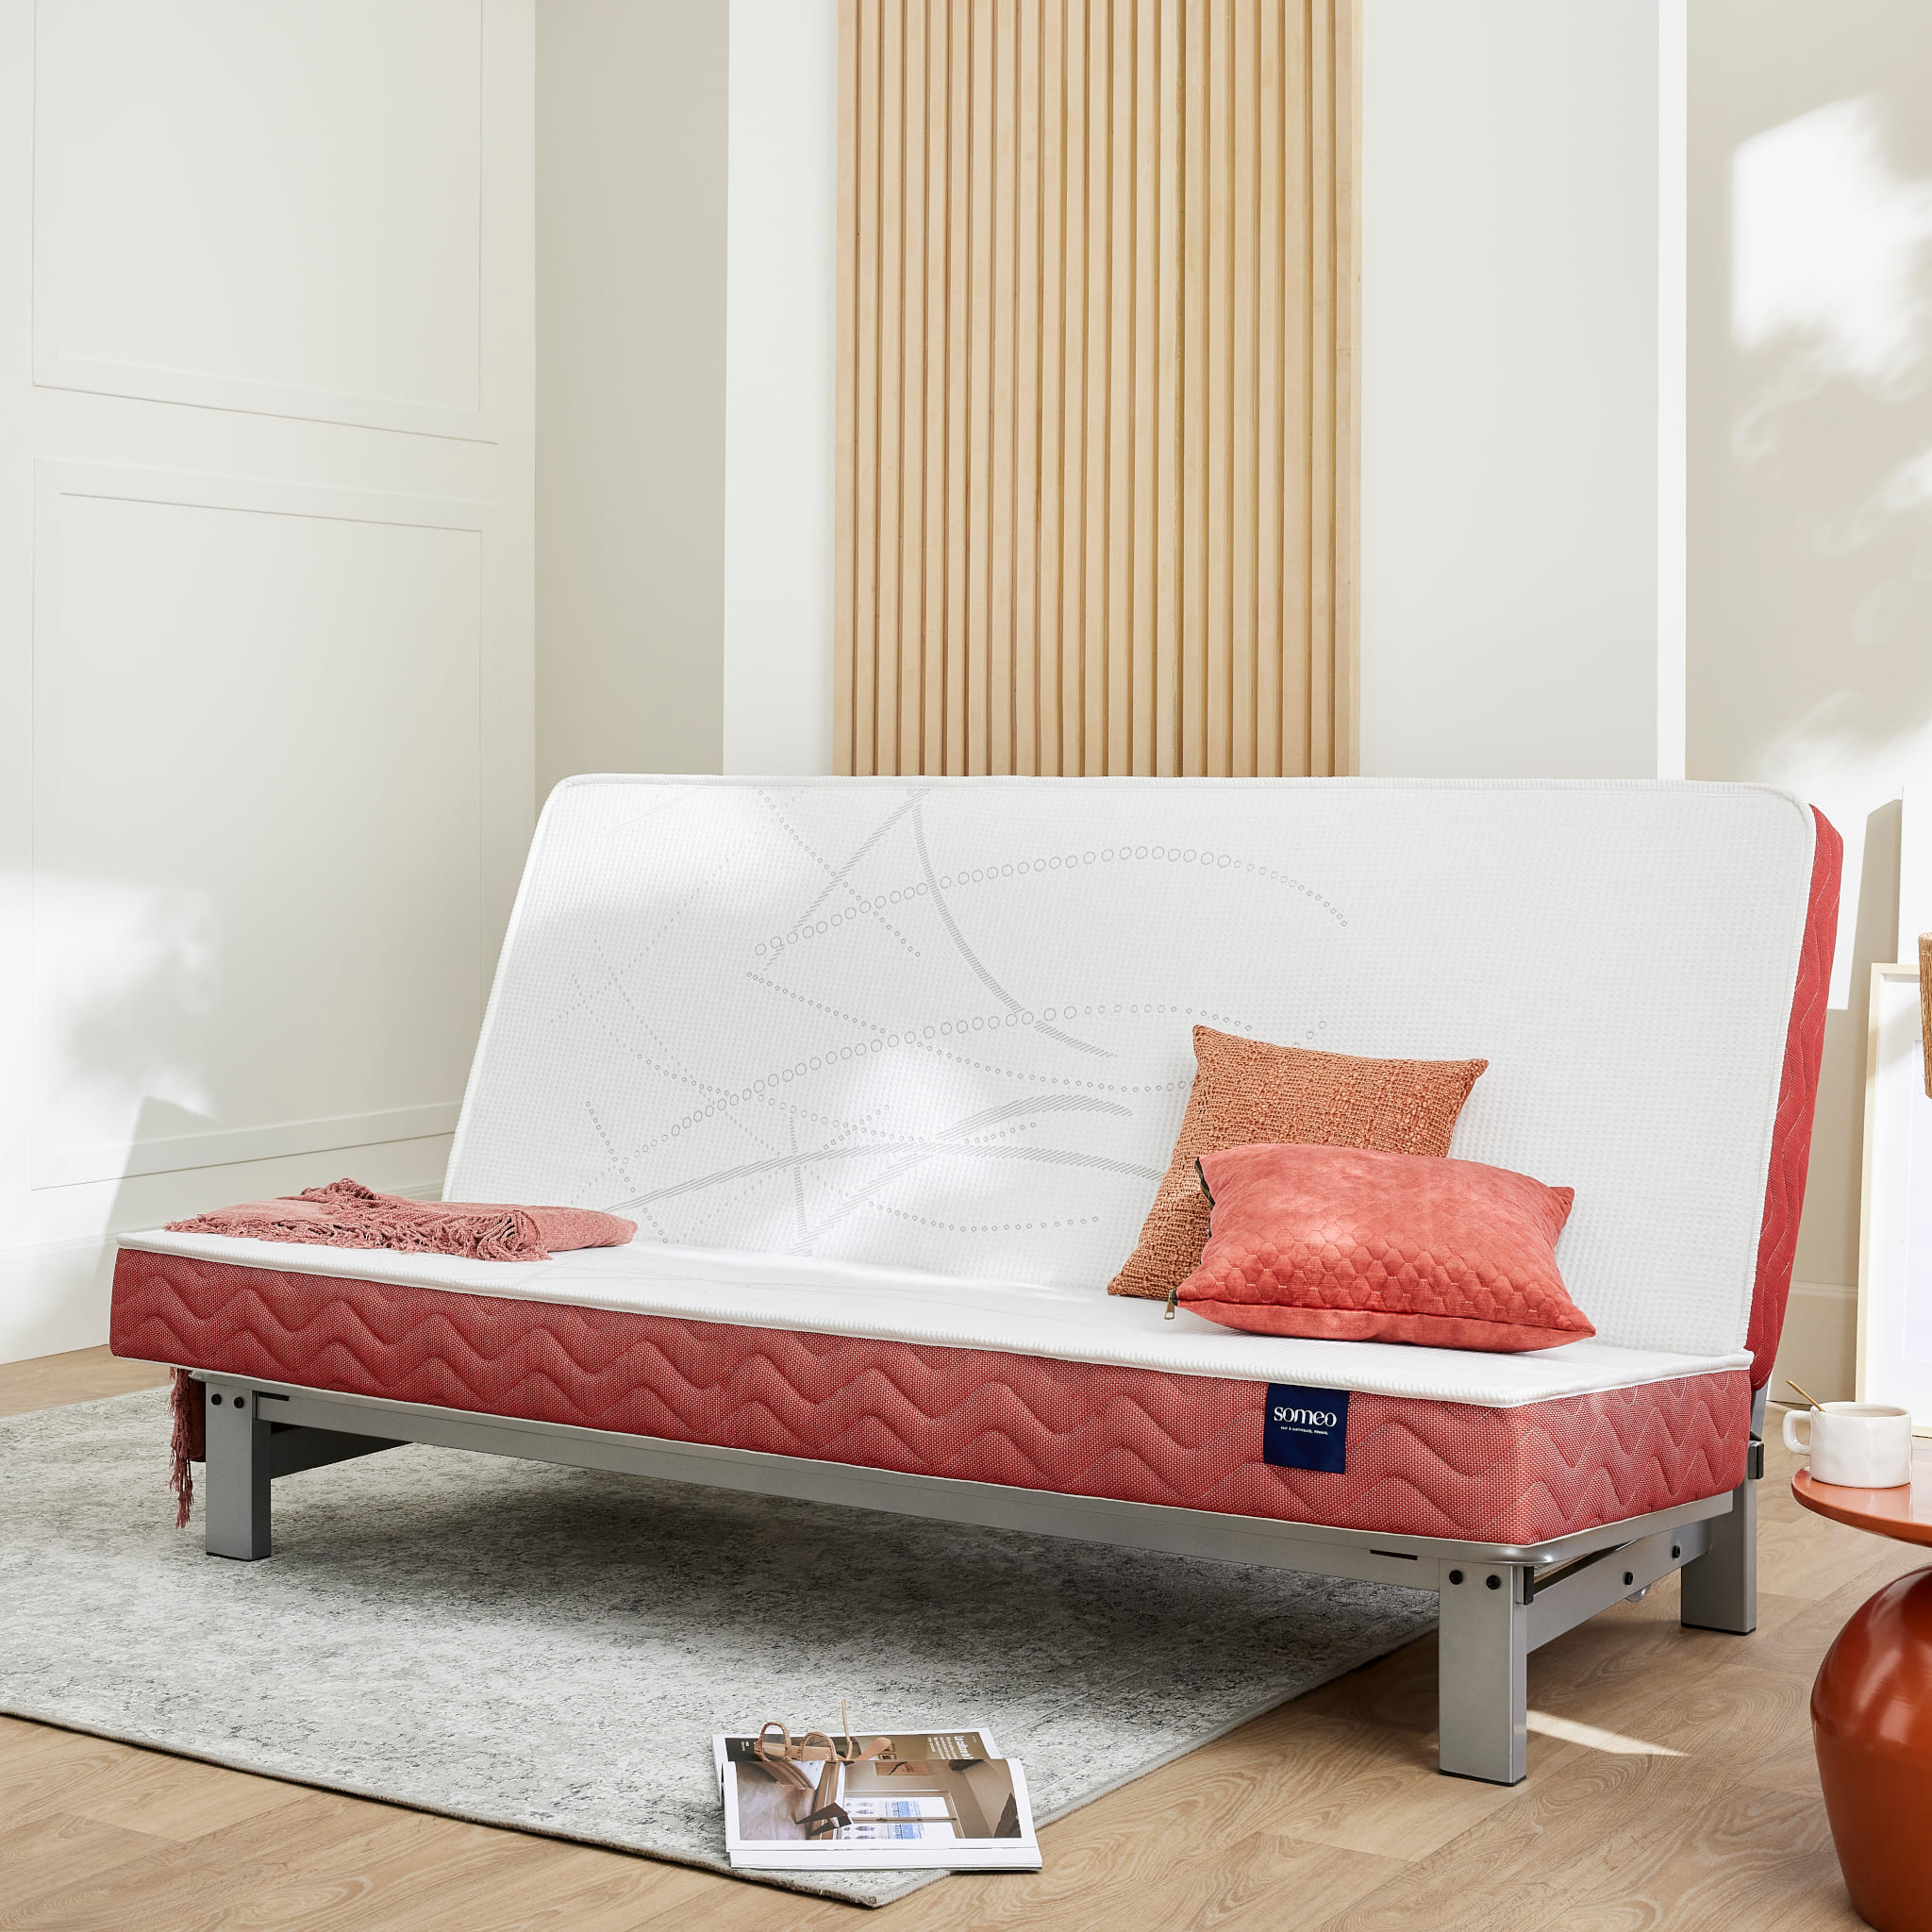 https://www.someo-literie.com/media/catalog/product/m/a/matelas_crepuscule400_clic_clac_canape_ambiance.jpg